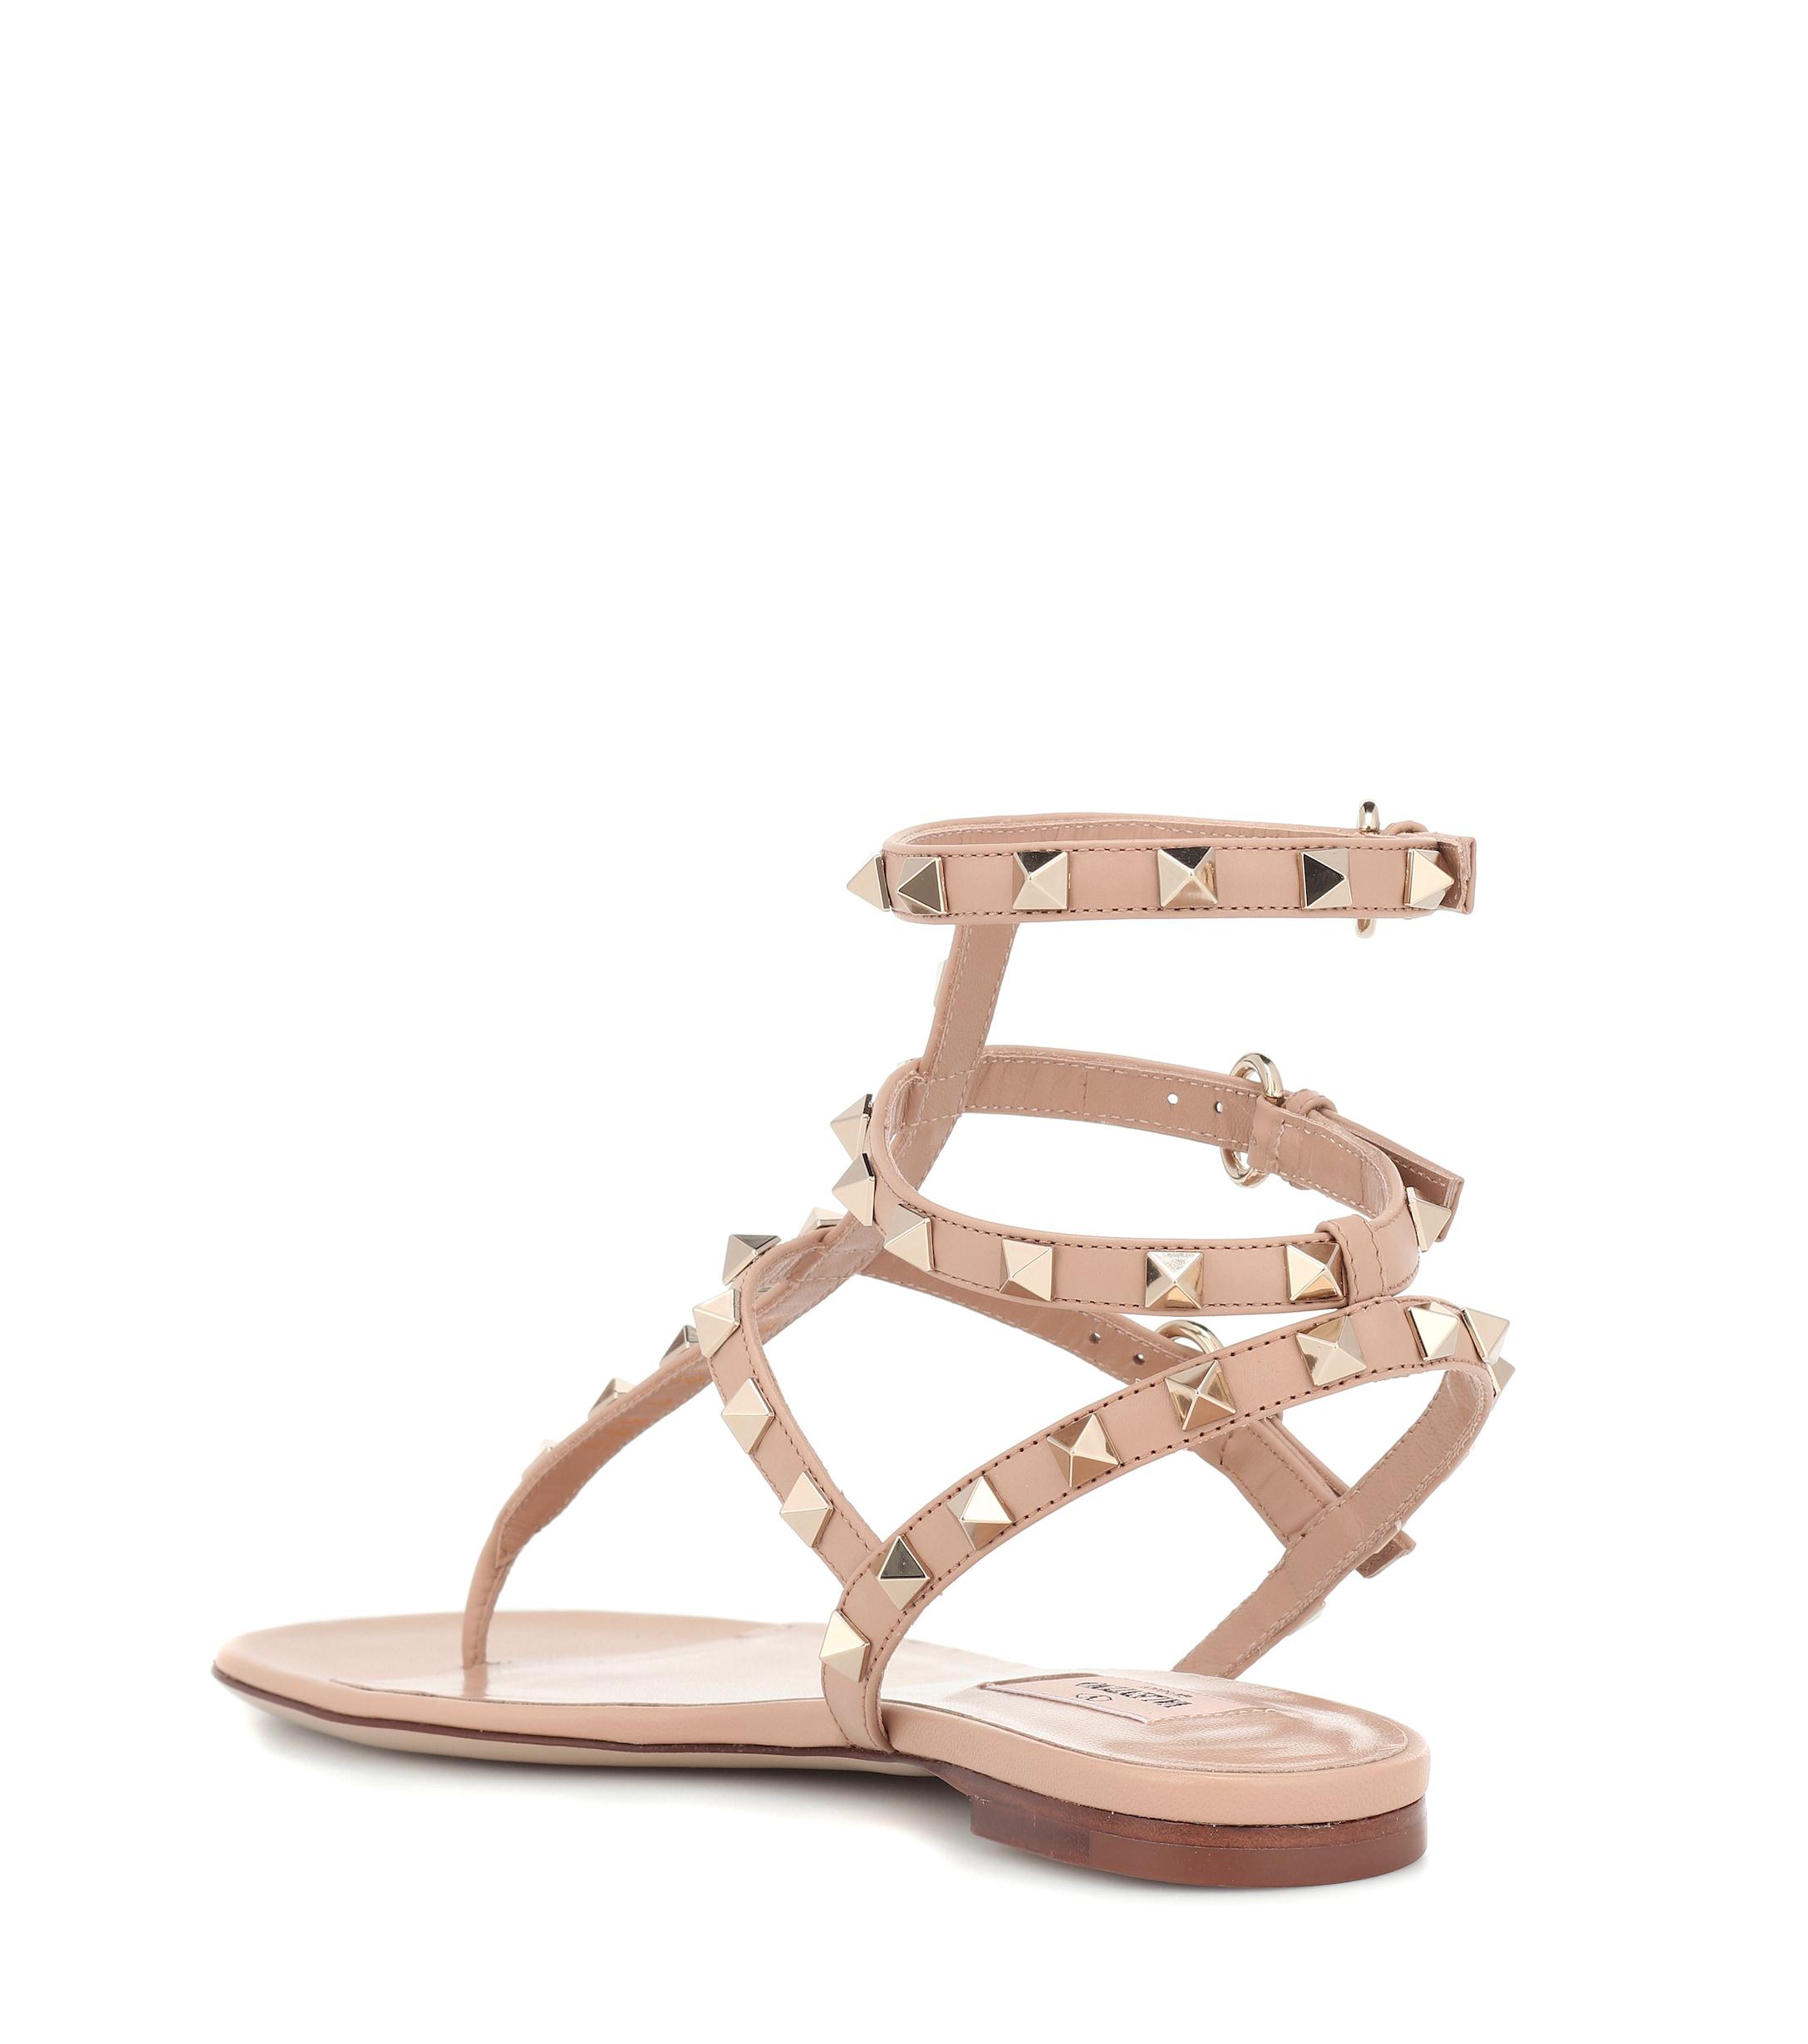 Valentino Rockstud Leather Flat Sandals in Natural - Lyst